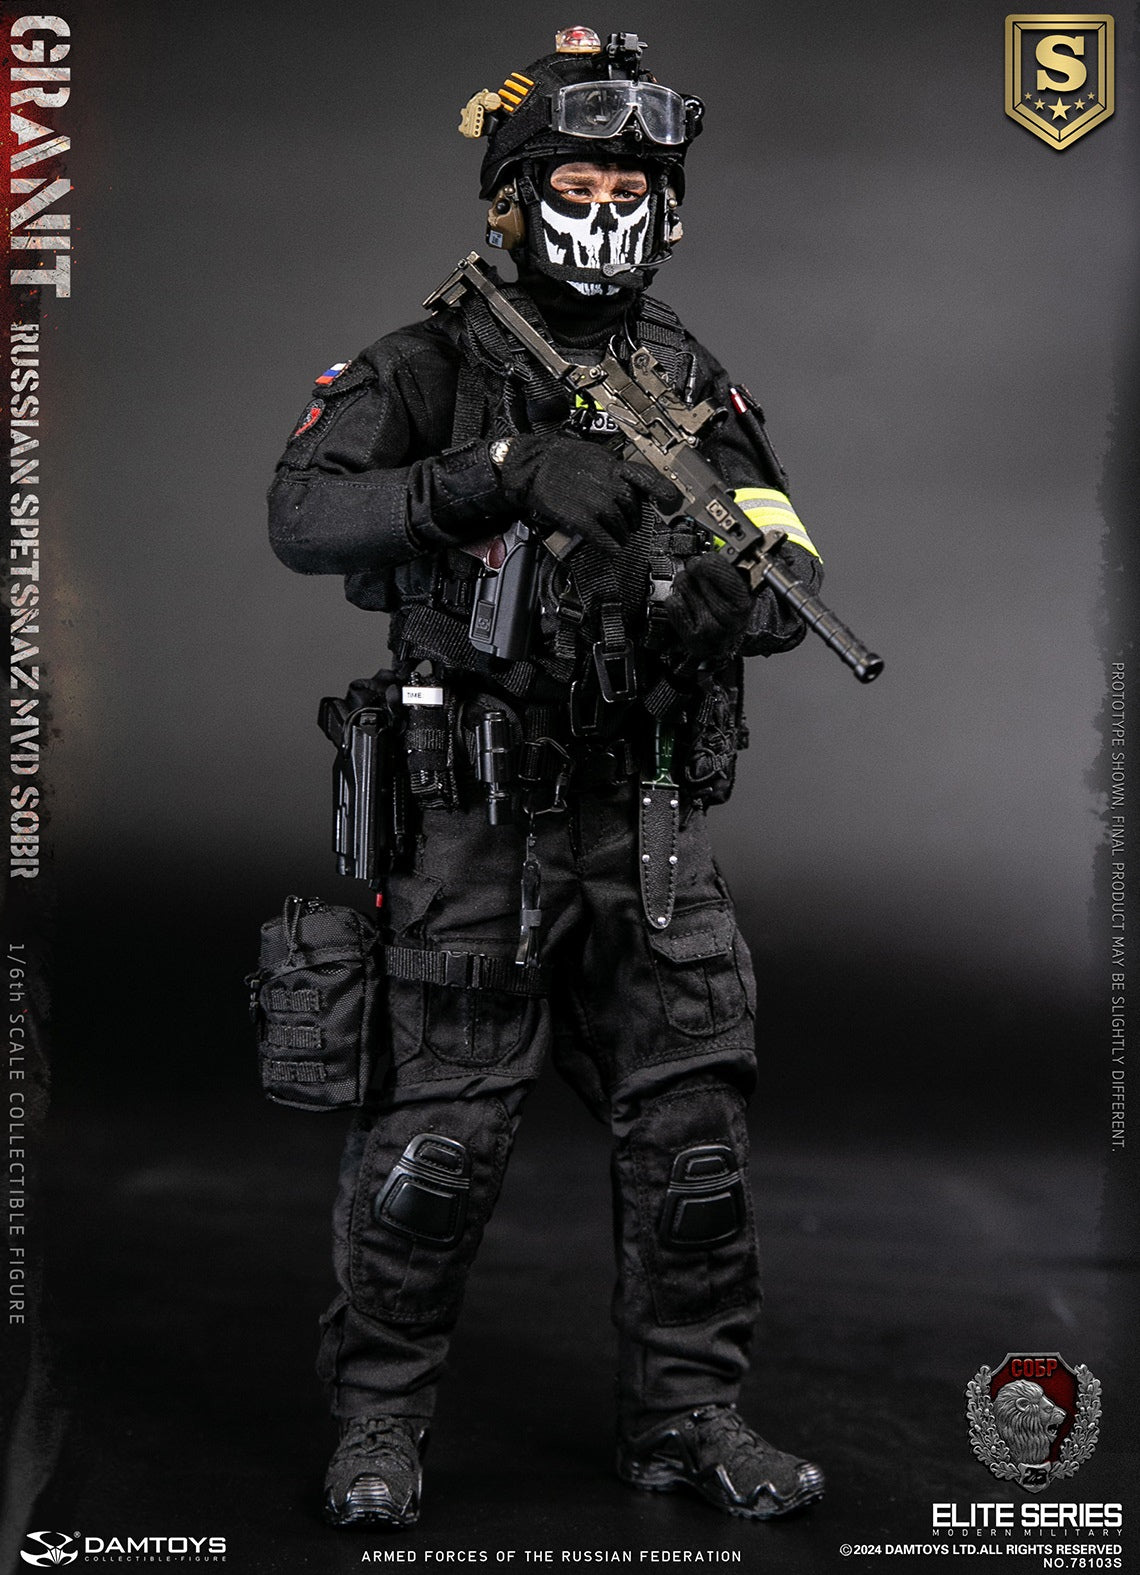 Damtoys - 78103S - Elite Series - Armed Forces of the Russian Federation: SPETSNAZ MVD SOBR Granit (Special ed.) (1/6 Scale)